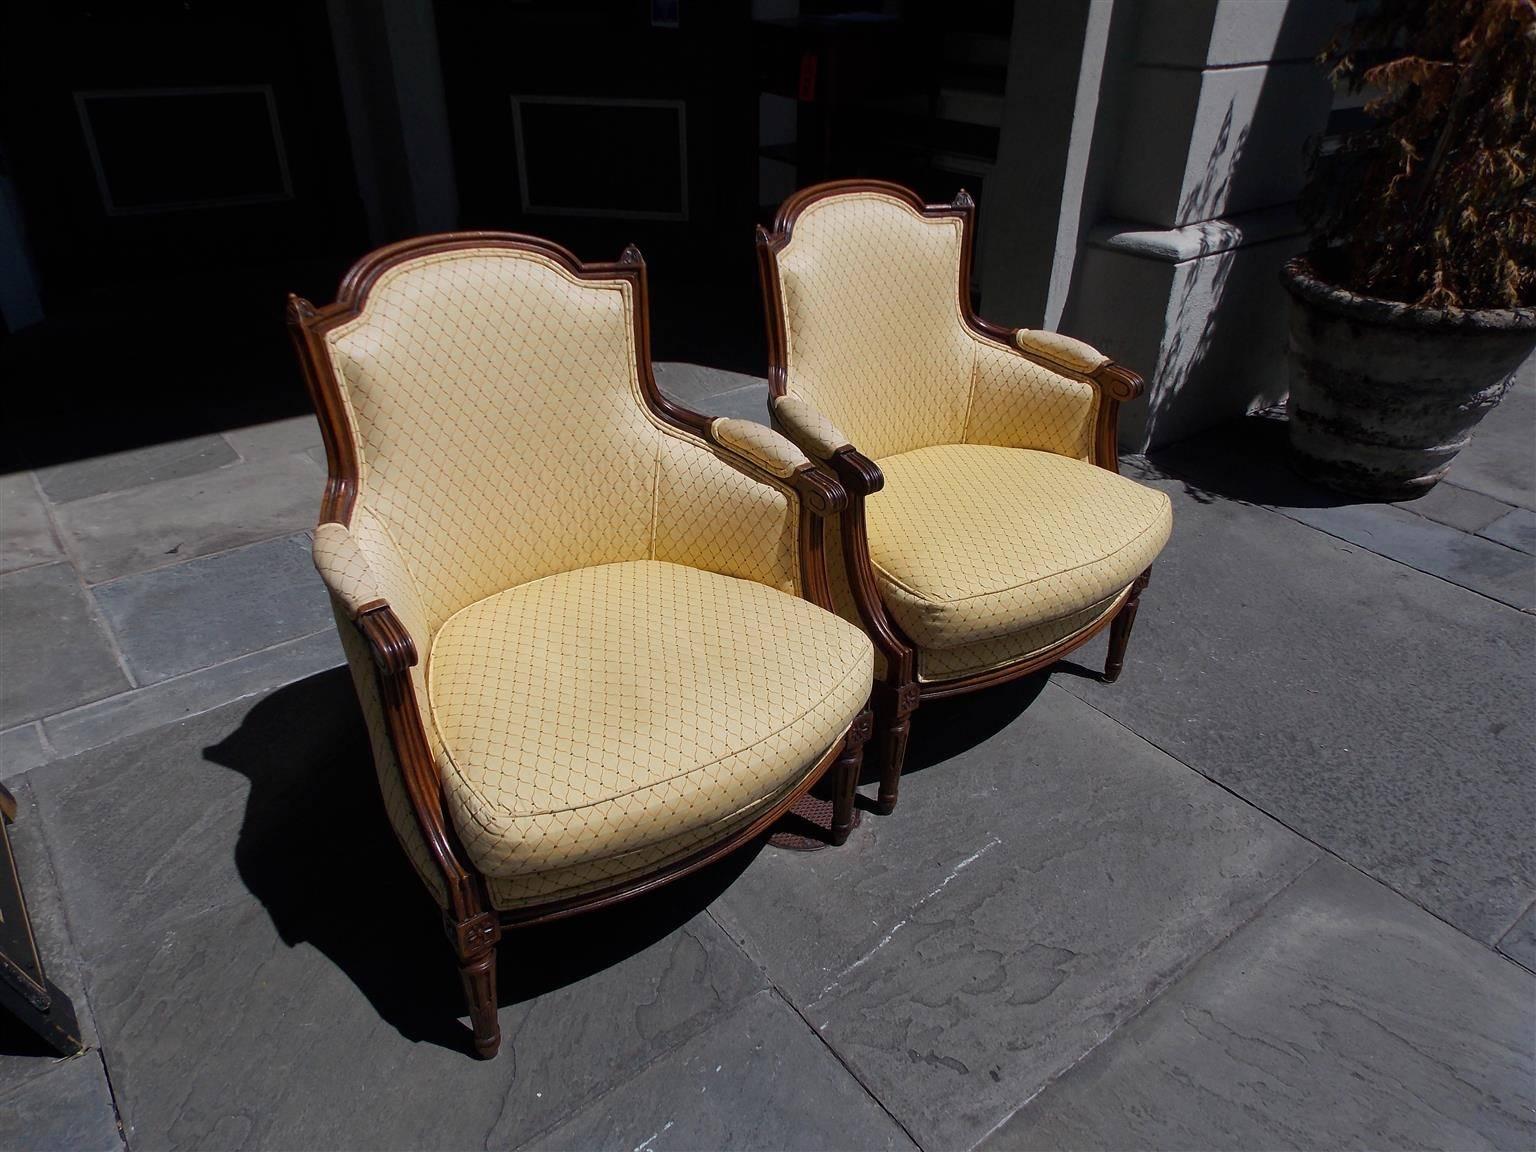 Pair of Italian Walnut Bergere armchairs with carved molded reeded edges, floral corner decorative finials, flanking scrolled arms, floral corner rosettes, and terminating on the original carved fluted ringed legs. Chairs are upholstered in a cross